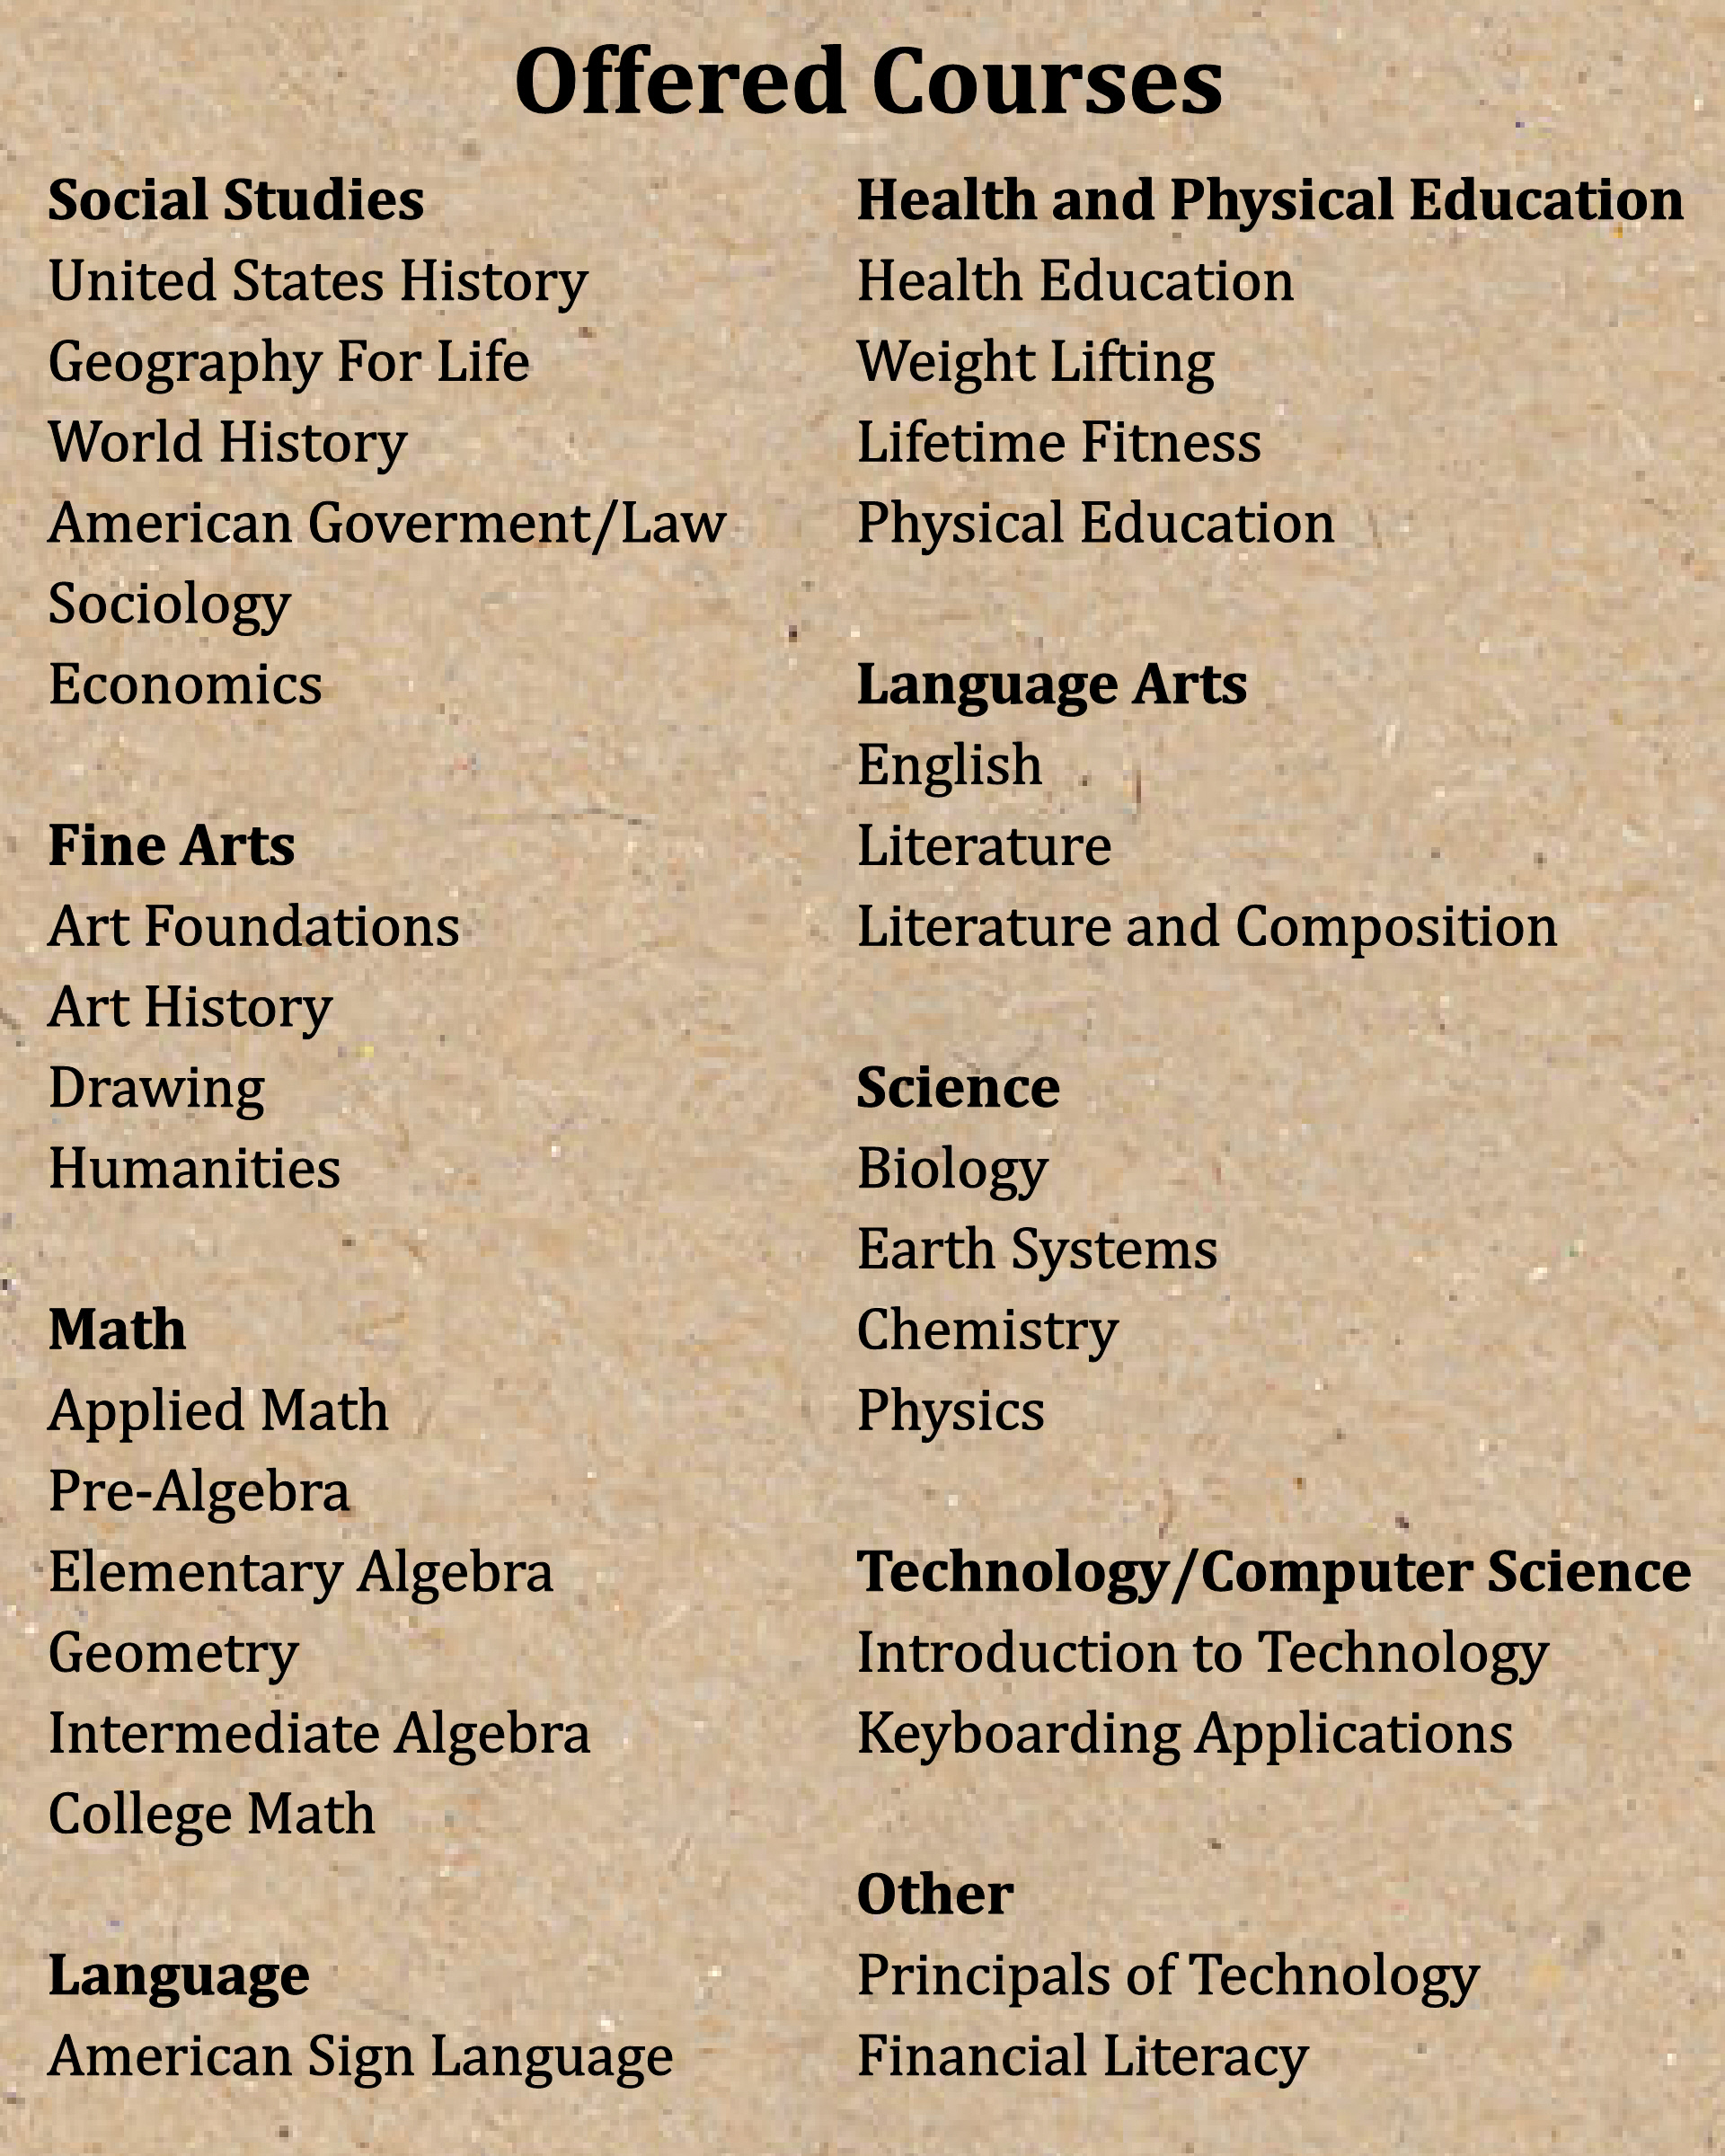 Offered Courses.jpg